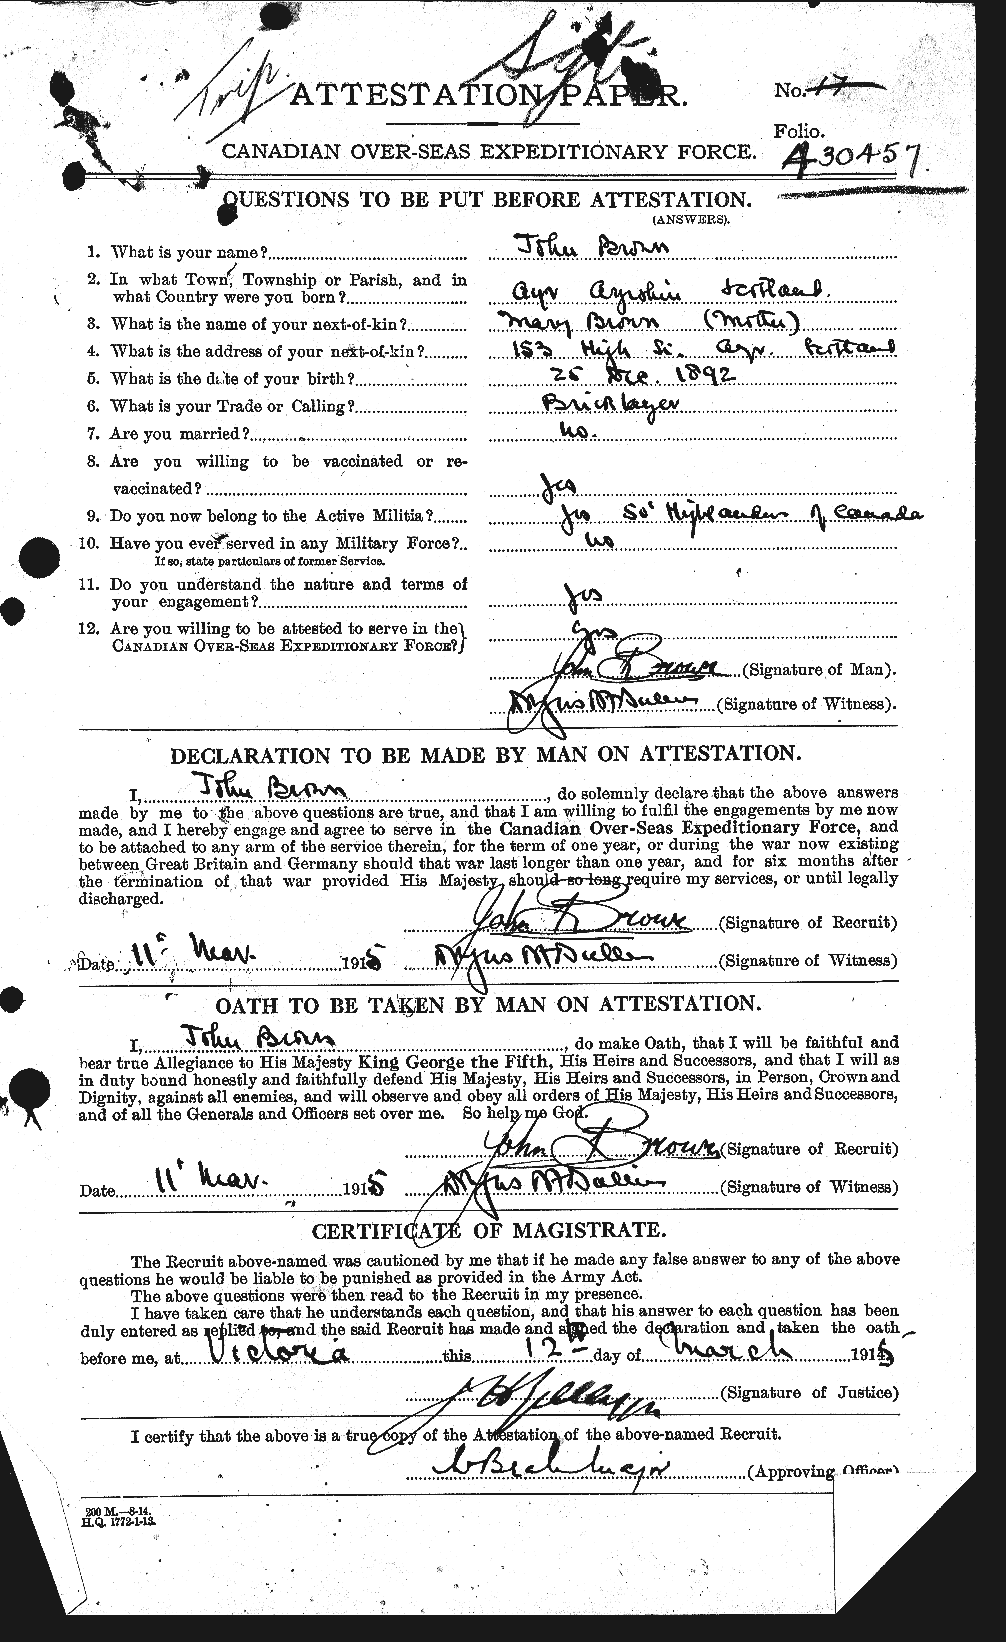 Personnel Records of the First World War - CEF 263917a